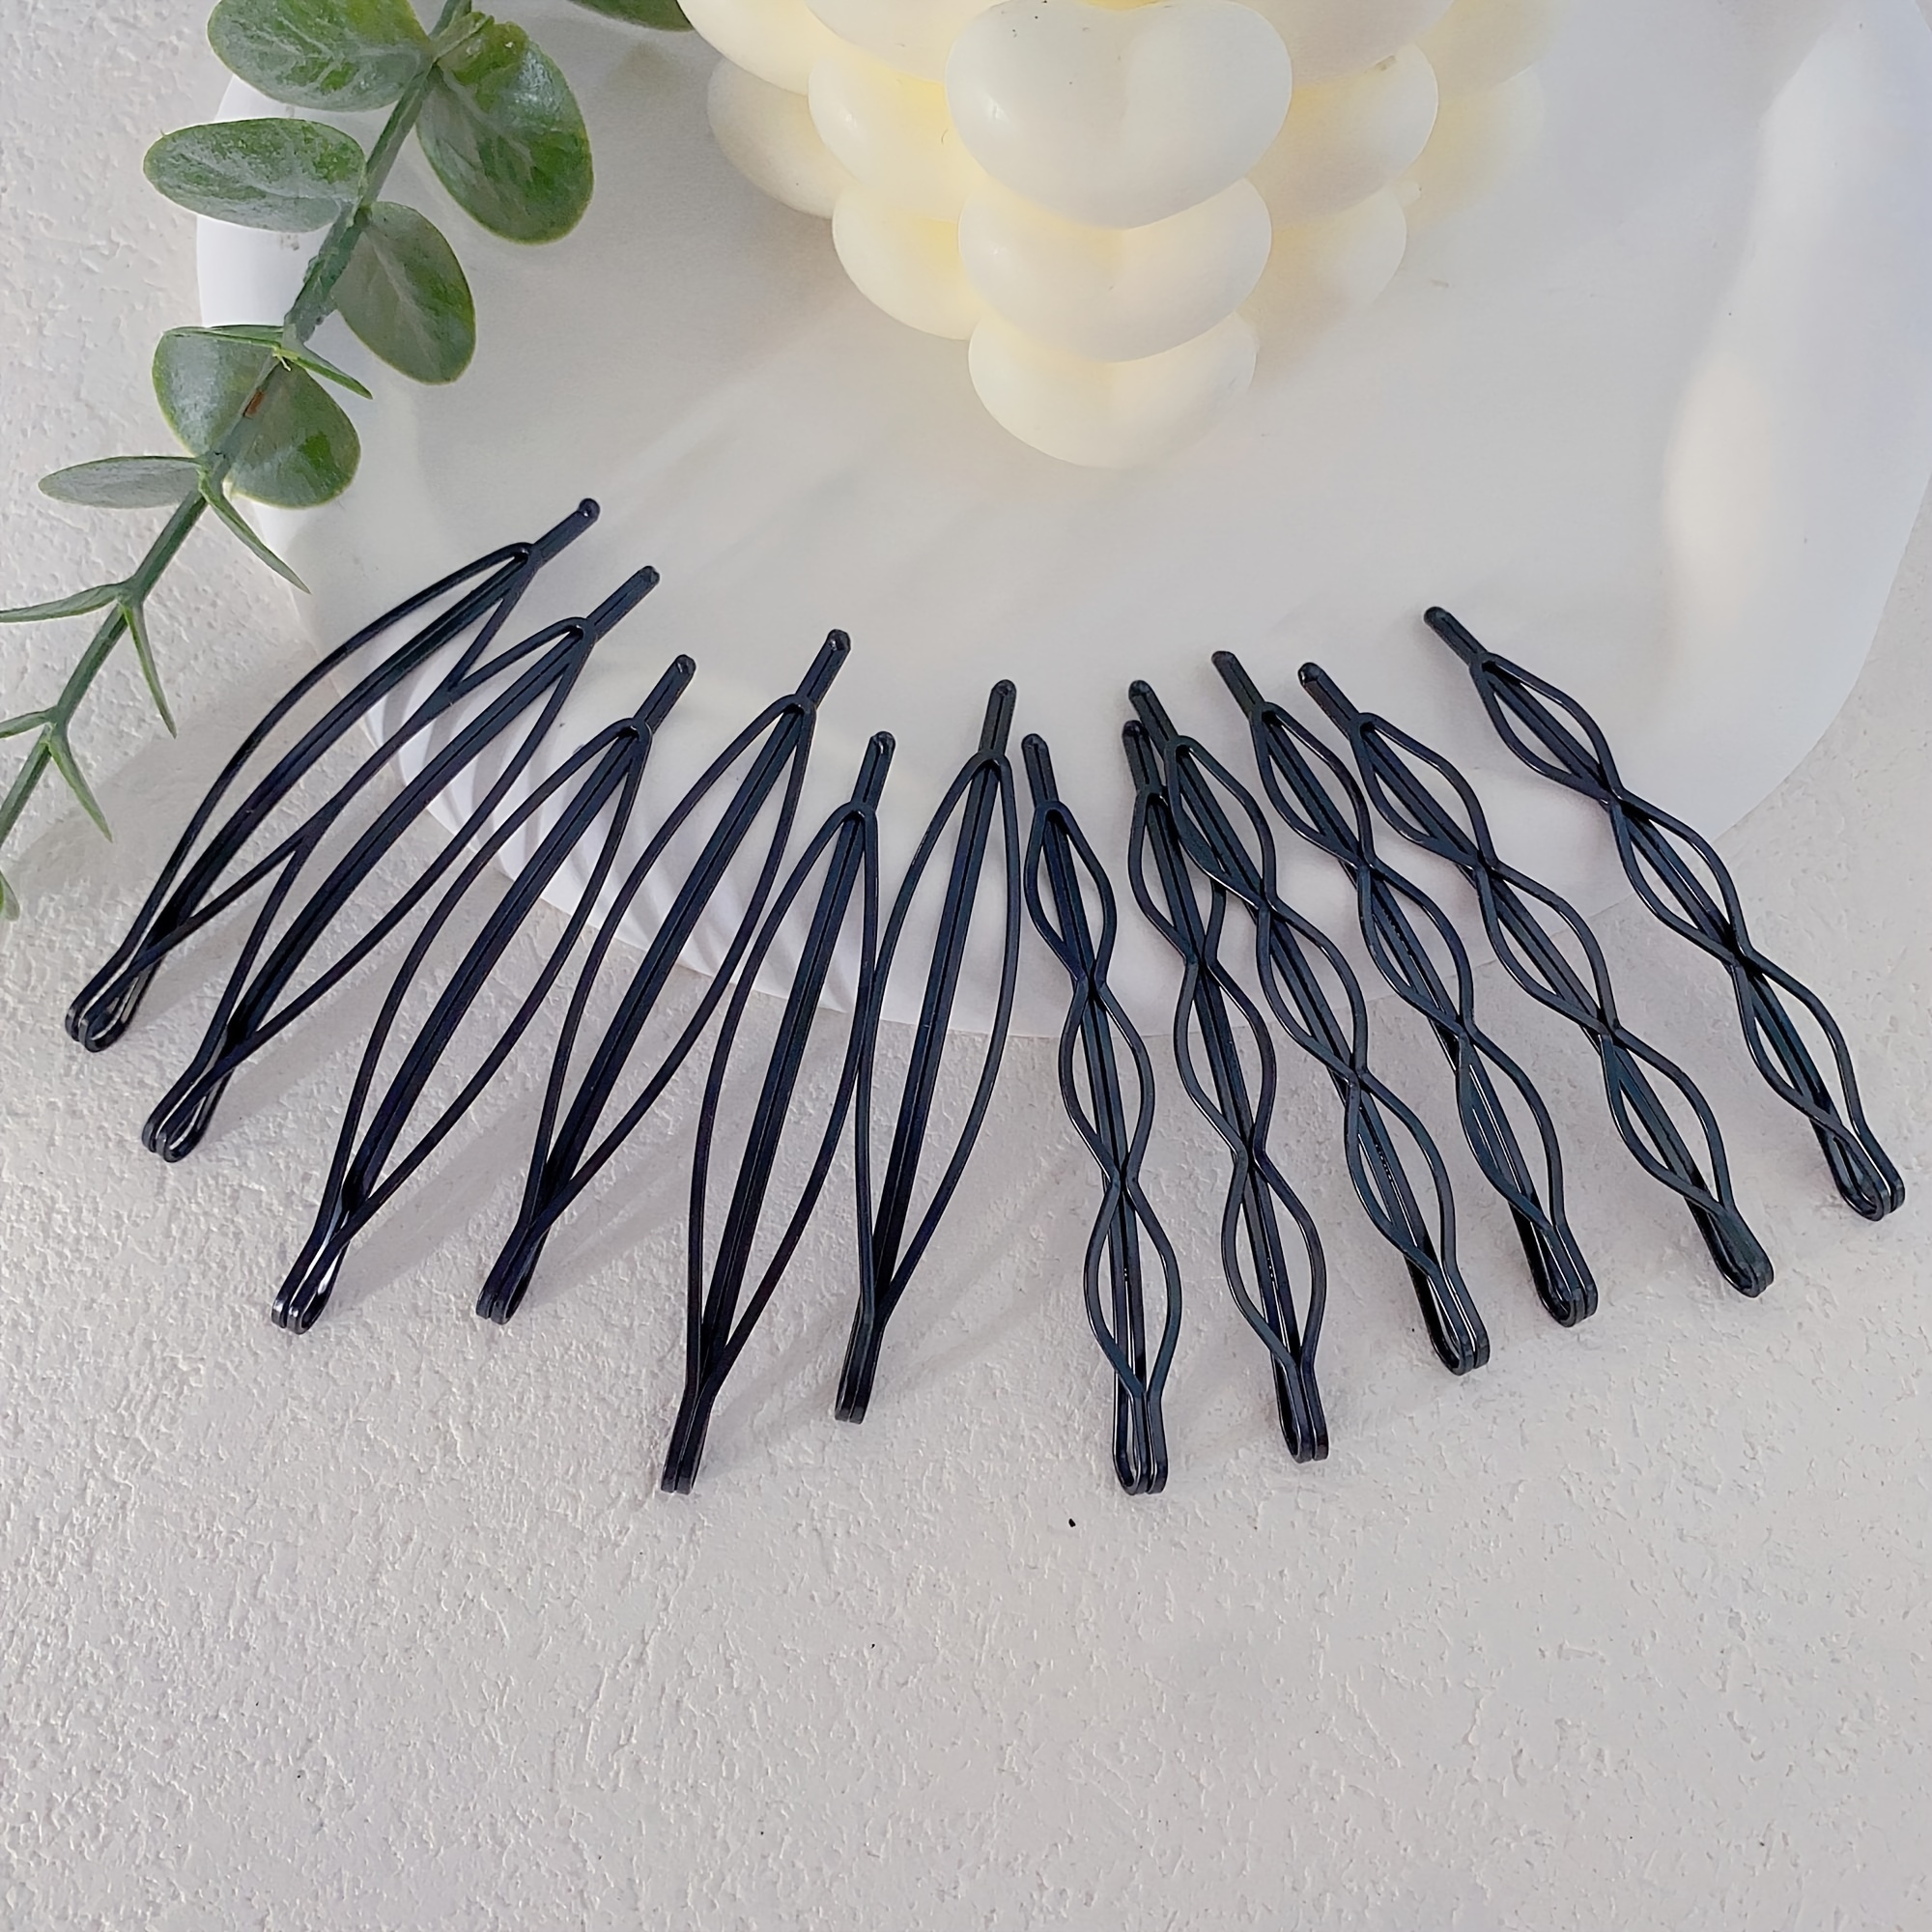 Getarme Hairpiece Tools Hairpin 20pcs Clip in Hair Extension Wig Clips for Human Hair Bangs Snap Hair Clips, Bobby Pins, Hairpins for, Christmas Gifts